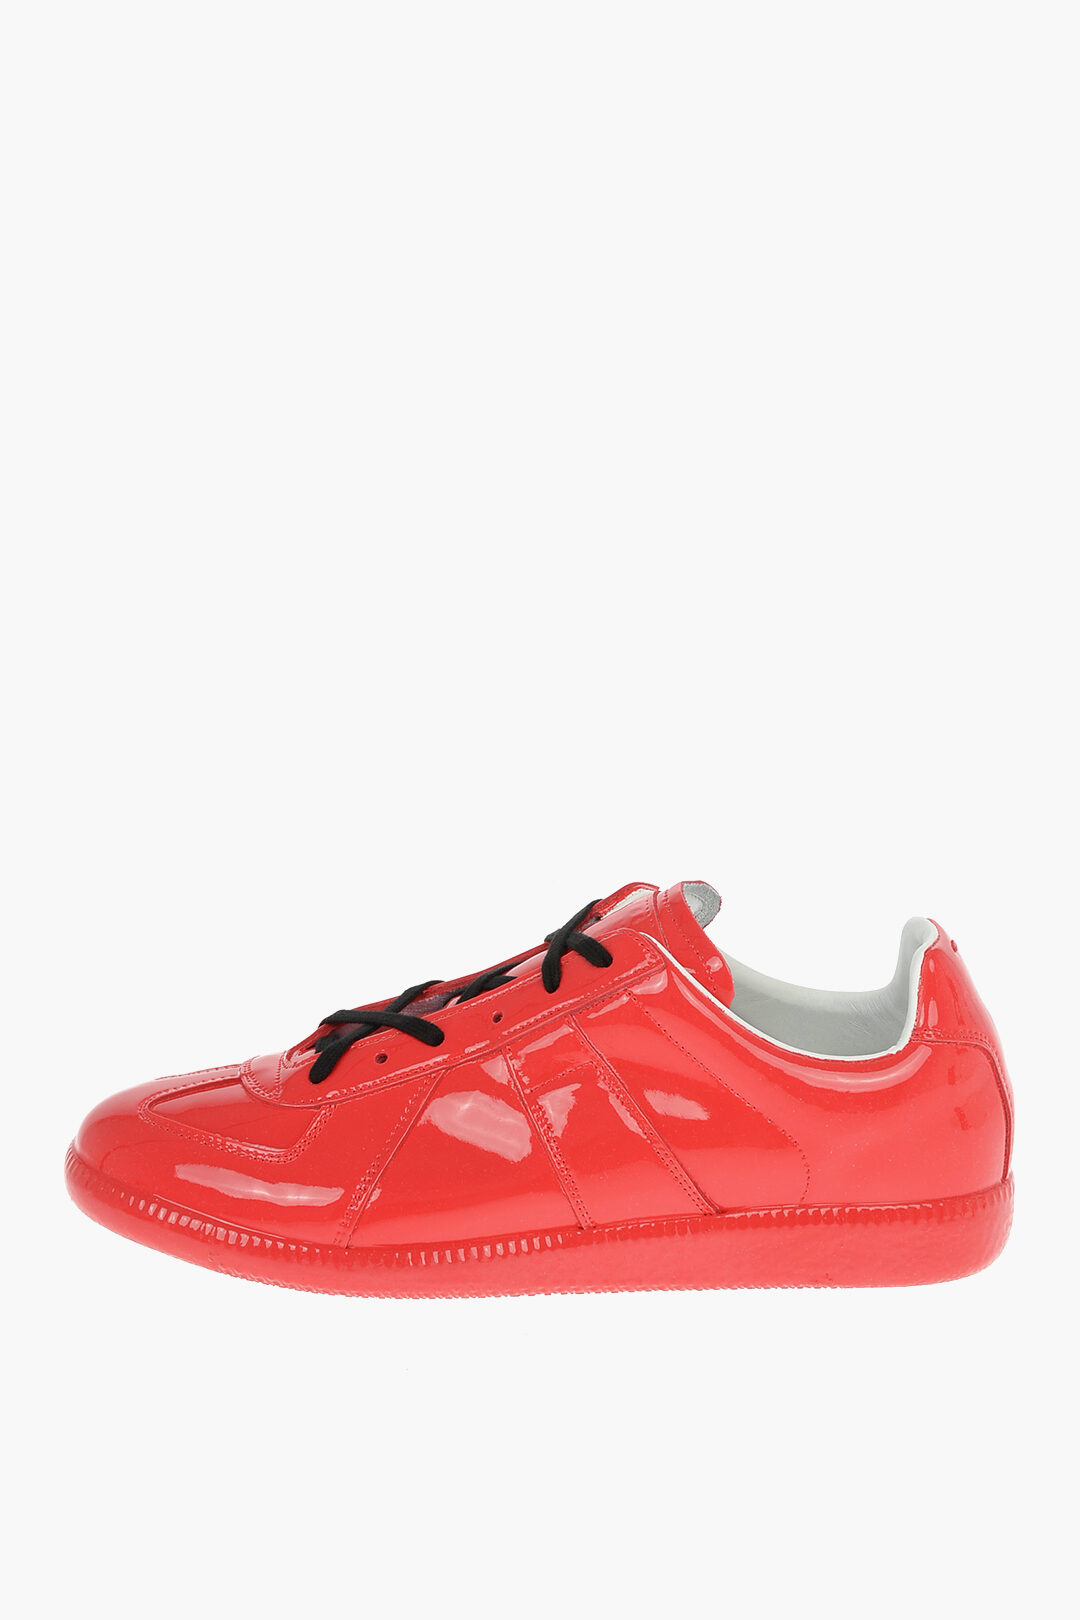 Margiela MM22 Leather REPLICA Sneakers men - Glamood Outlet